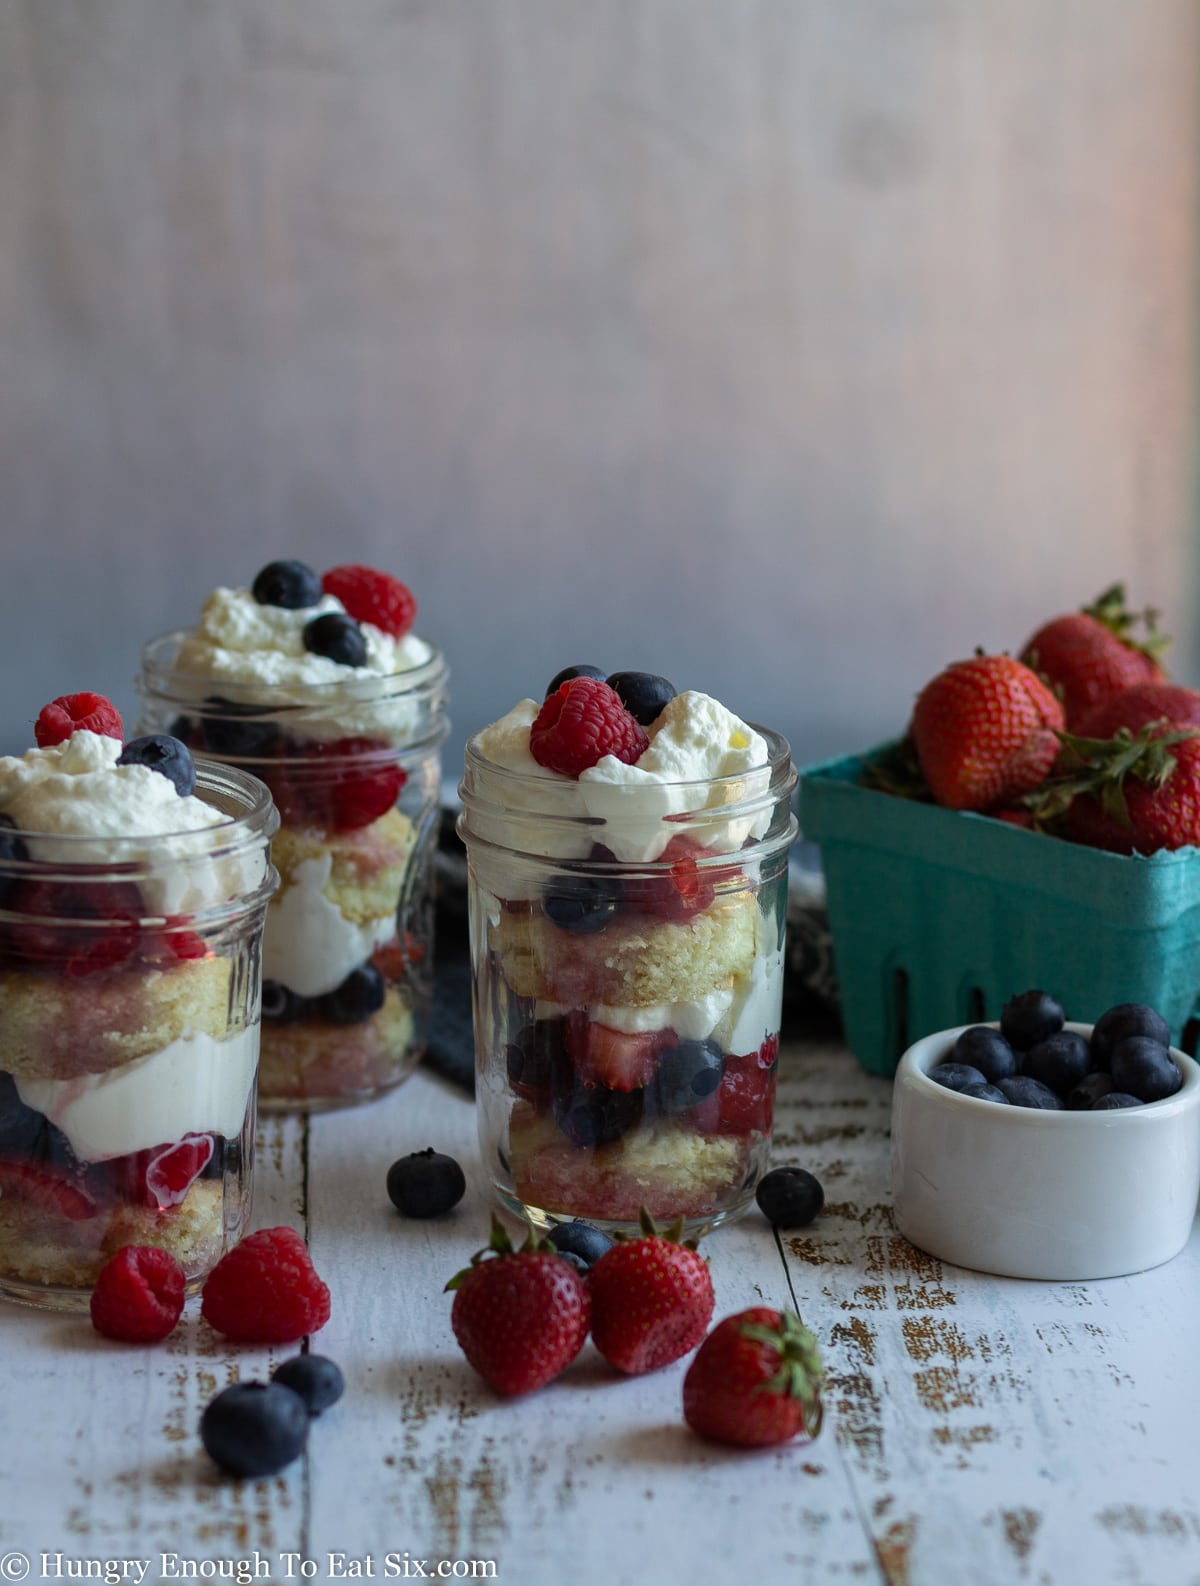 Three trifles of fruit and cream in glass jars next to containers of berries.